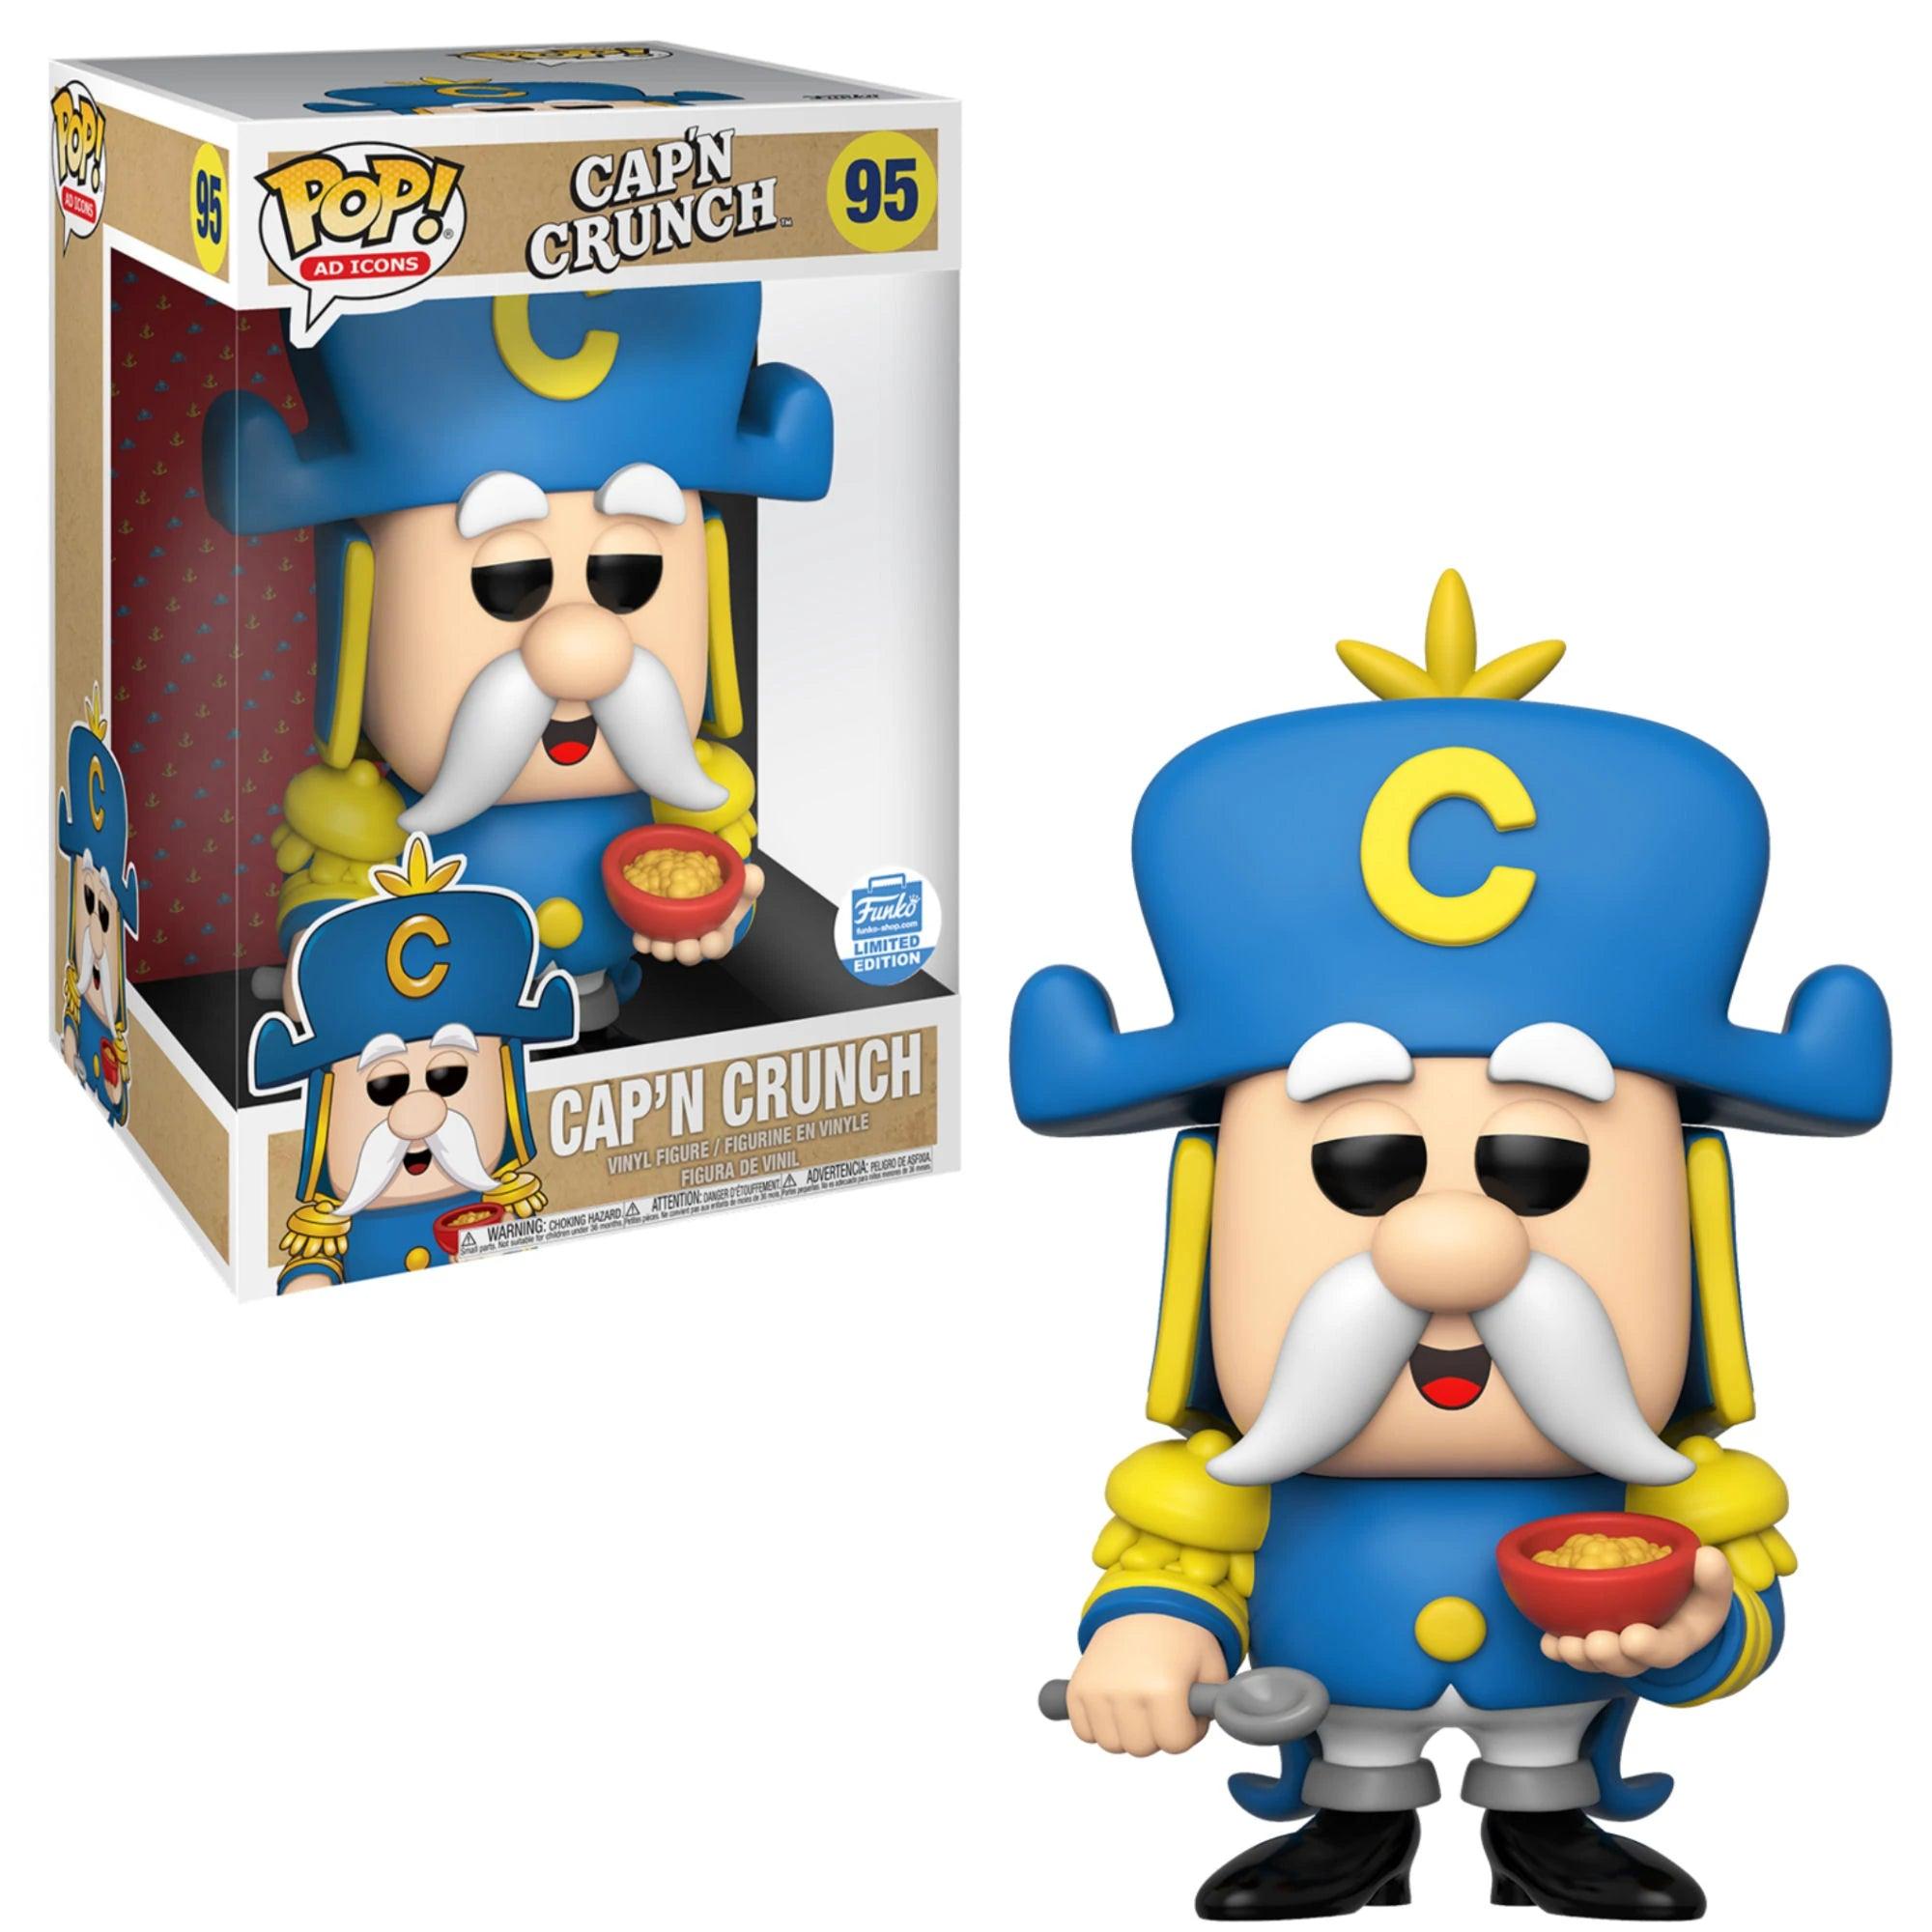 Pop! Jumbo - Ad Icons - The Quaker Oats Company - Cap'n Crunch - #95 - Funko Store LIMITED Edition - Hobby Champion Inc